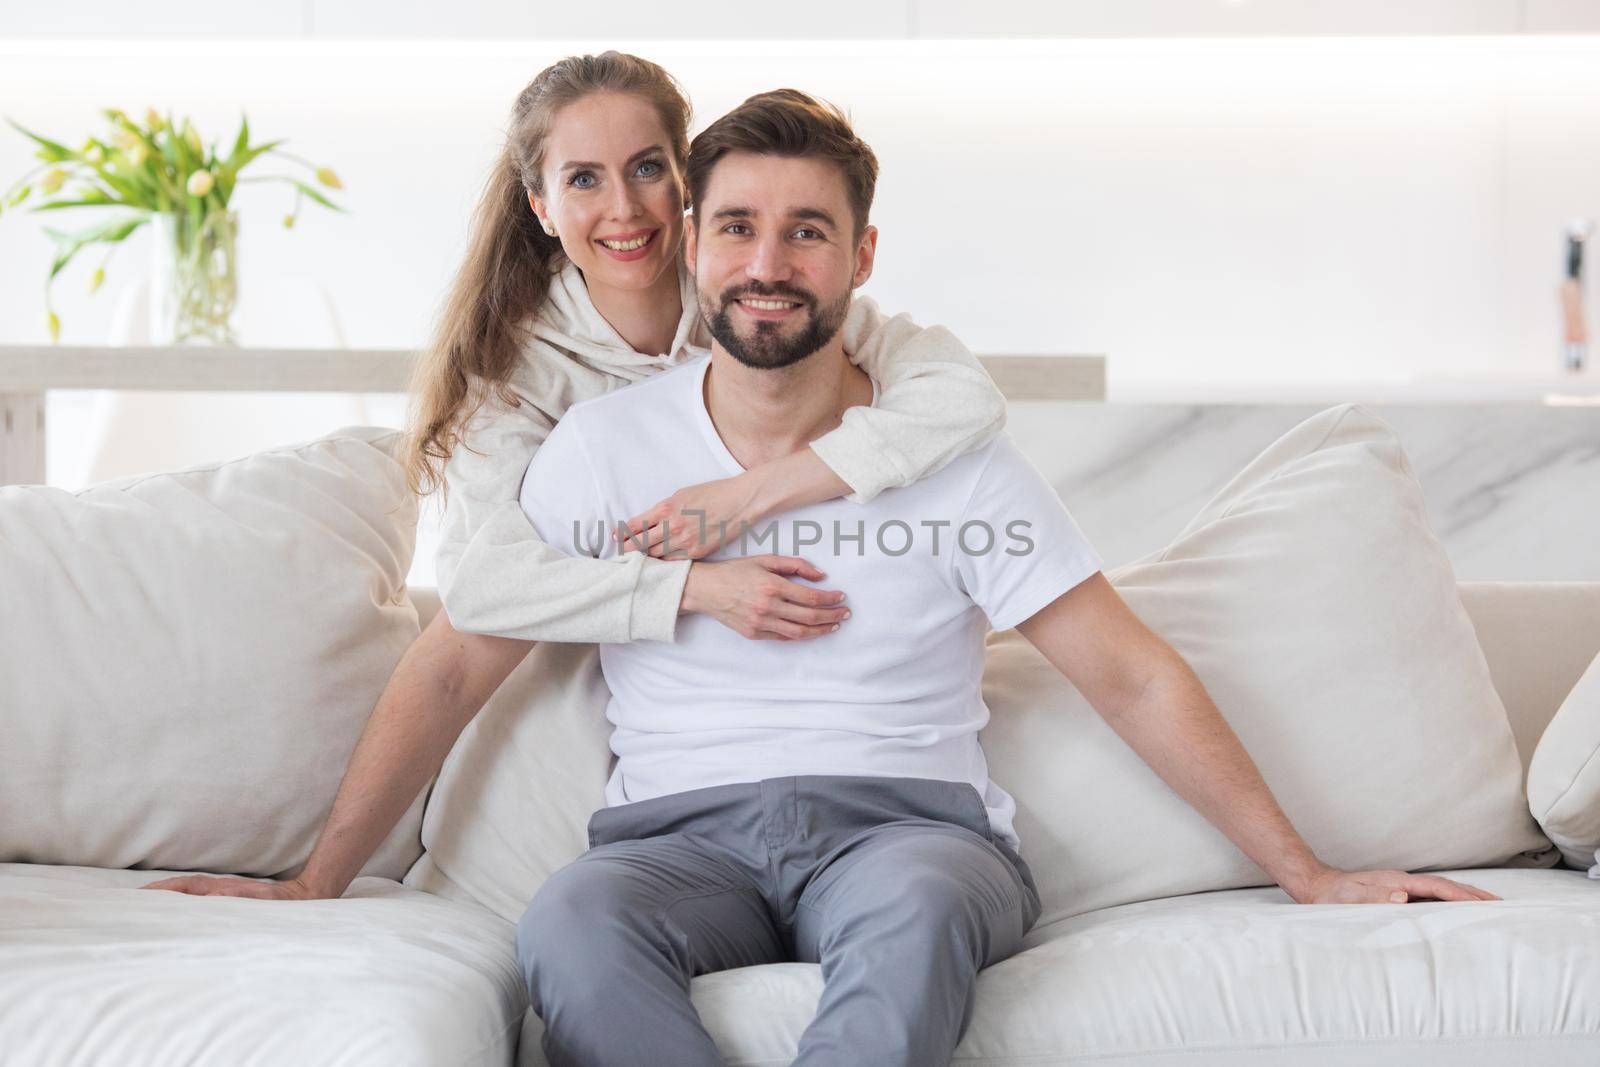 Couple relaxing in living room by ALotOfPeople